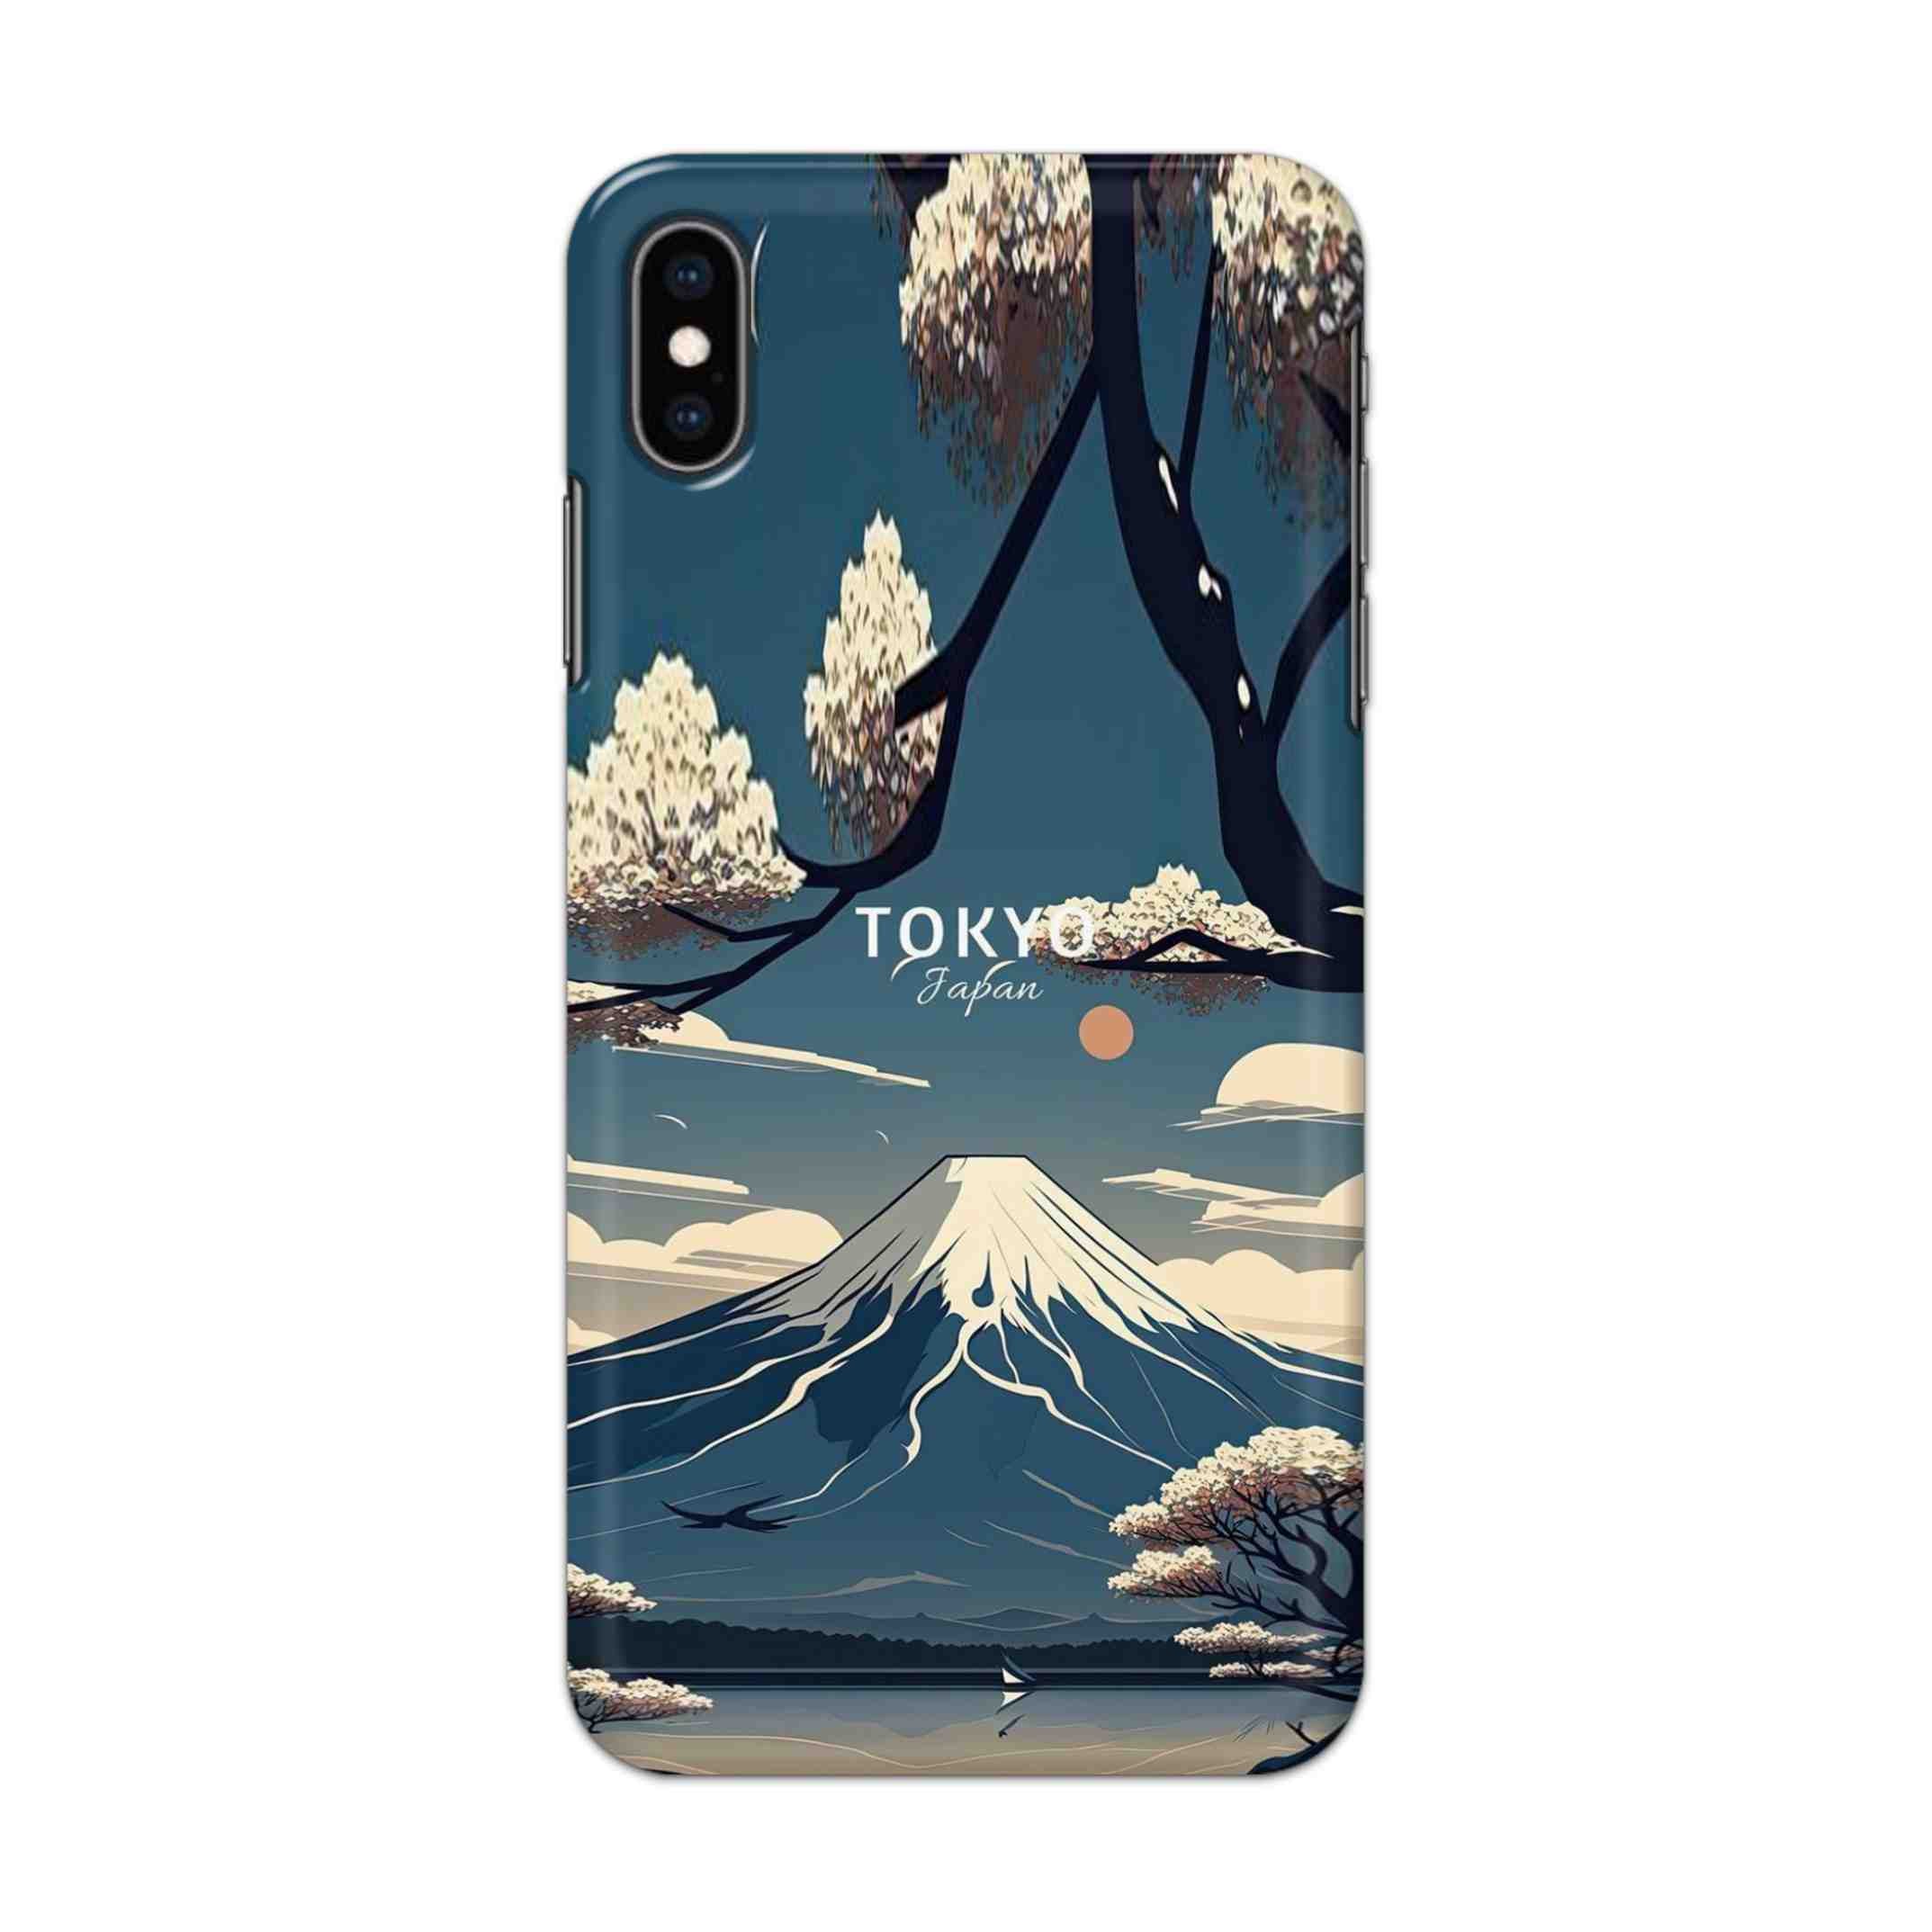 Buy Tokyo Hard Back Mobile Phone Case/Cover For iPhone XS MAX Online